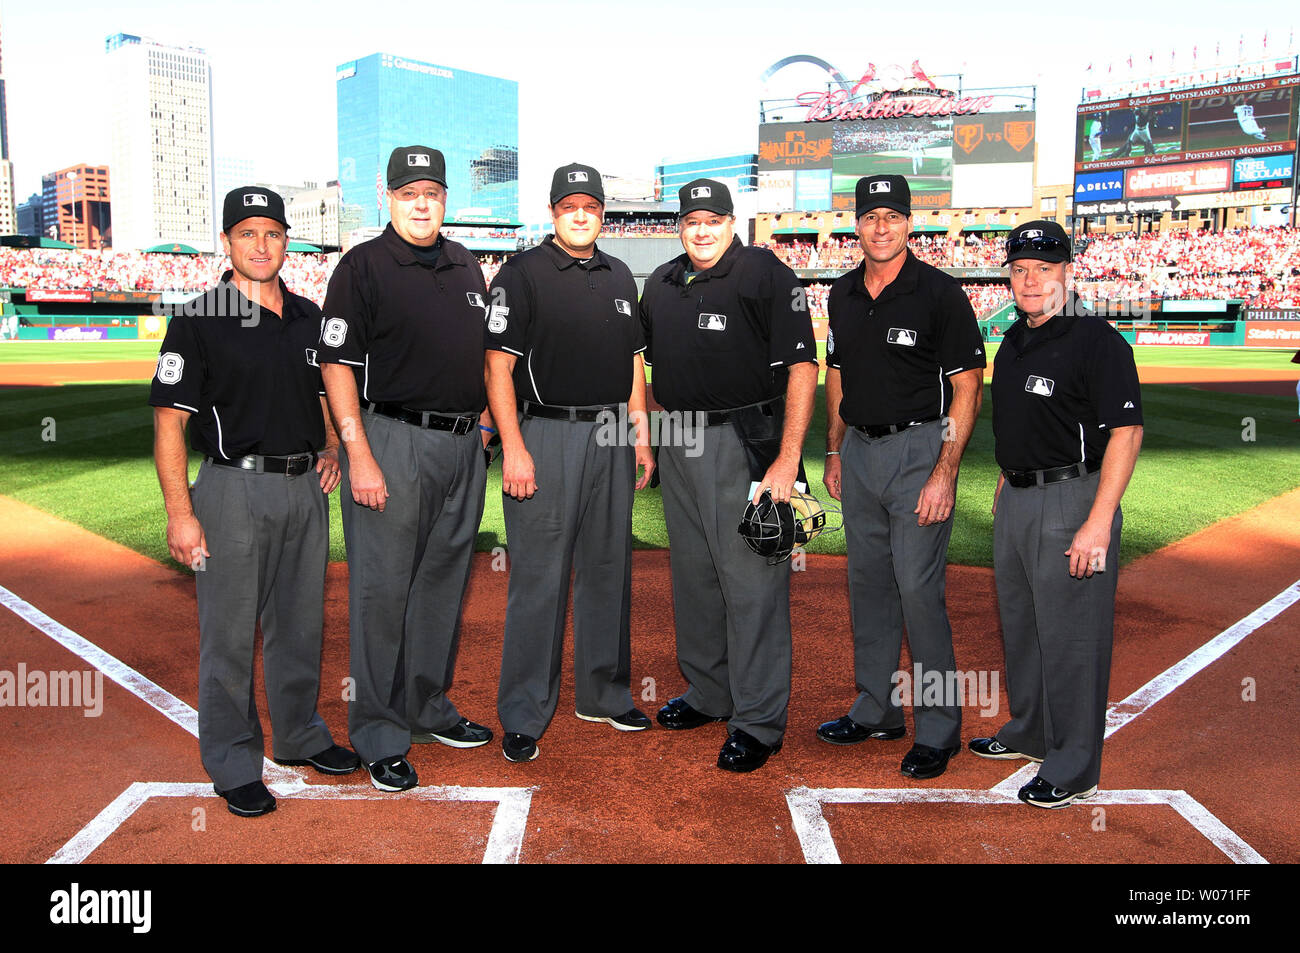 Umpires (L TO R)  Chris Guccione, Gary Cederstrom, Chad Fairchild, Jerry Layne, Angel Hernandez and Jerry Meals pose for a photograph before the start of Game 3 of the NLDS between the Philadelphia Phillies and the St. louis Cardinals at Busch Stadium in St. Louis on October 4, 2011.    UPI/Bill Greenblatt Stock Photo